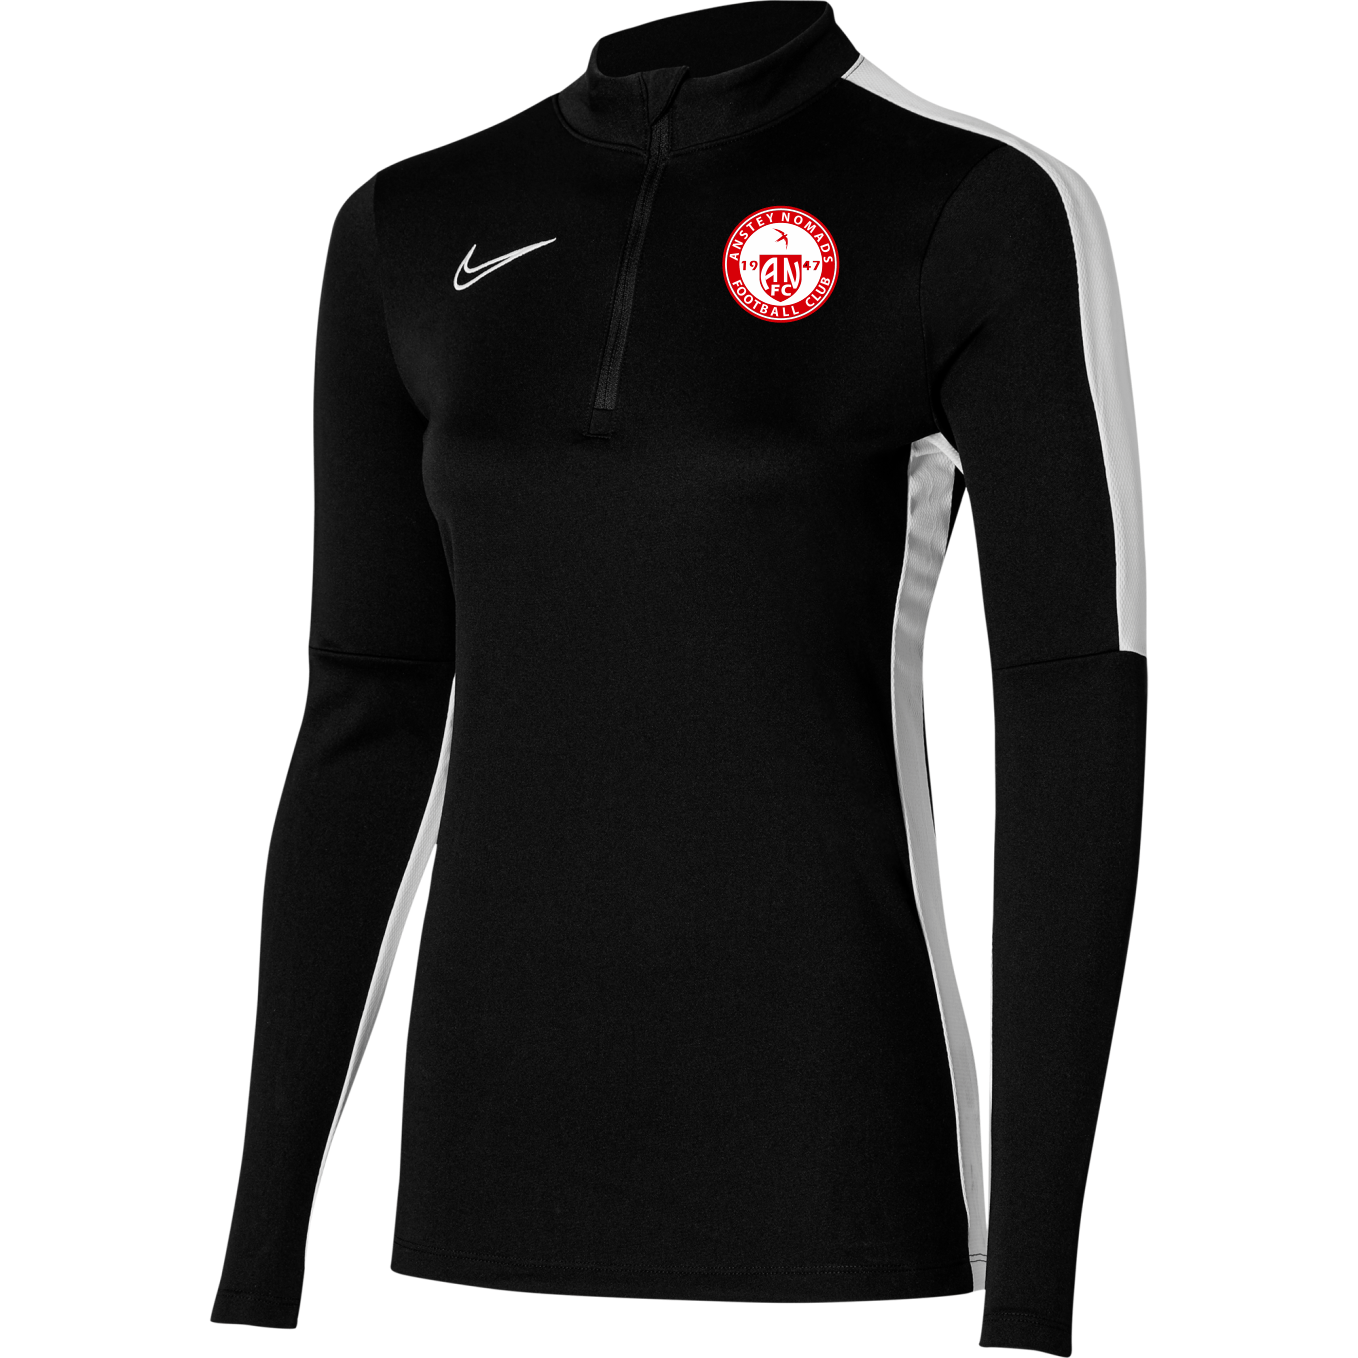 Anstey Nomads - Women's Academy 23 Drill Top (Adults)